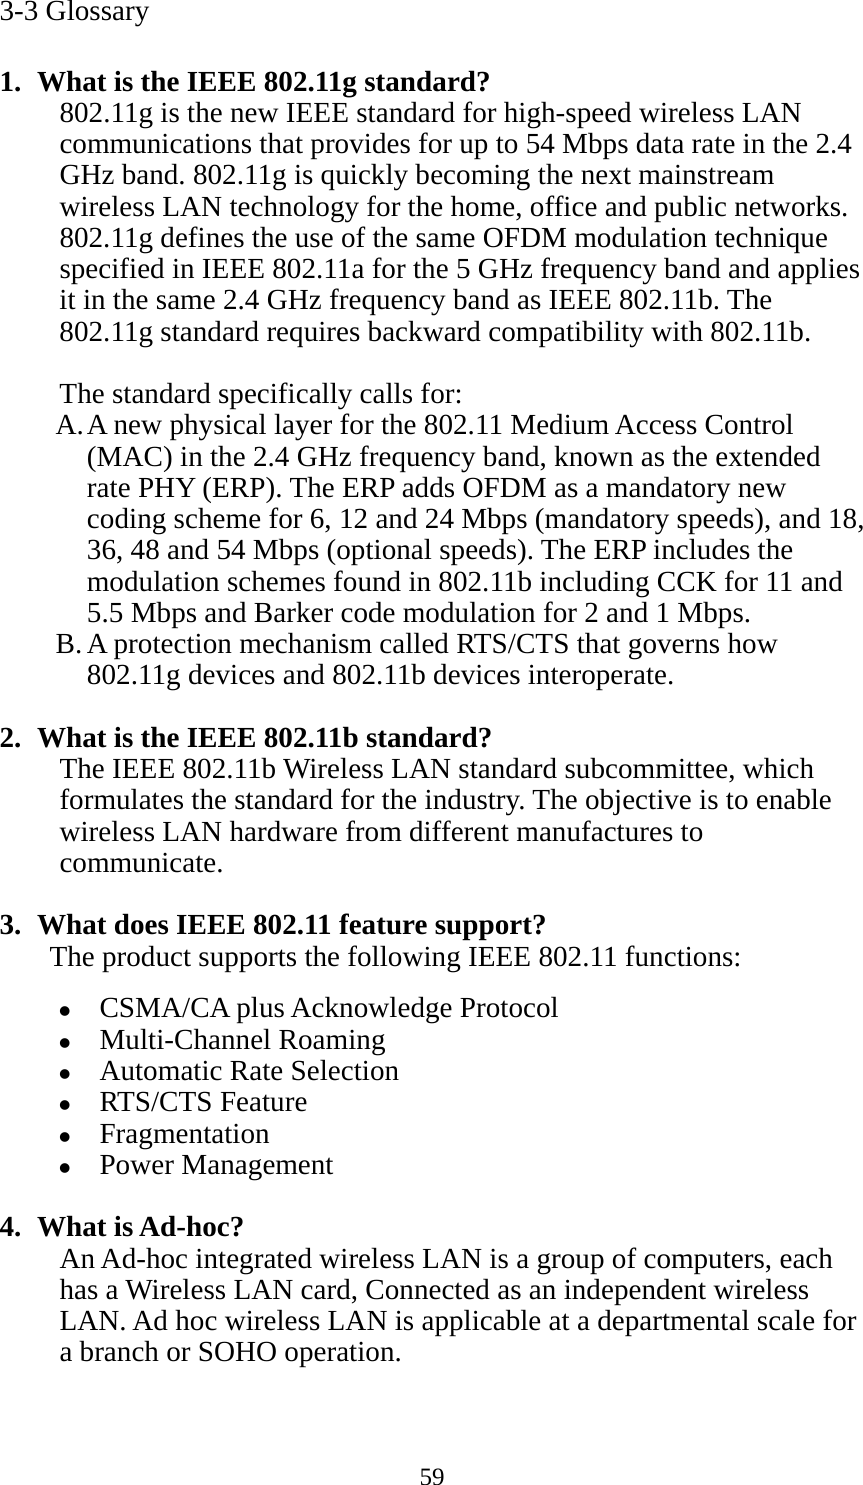  593-3 Glossary  1. What is the IEEE 802.11g standard? 802.11g is the new IEEE standard for high-speed wireless LAN communications that provides for up to 54 Mbps data rate in the 2.4 GHz band. 802.11g is quickly becoming the next mainstream wireless LAN technology for the home, office and public networks.   802.11g defines the use of the same OFDM modulation technique specified in IEEE 802.11a for the 5 GHz frequency band and applies it in the same 2.4 GHz frequency band as IEEE 802.11b. The 802.11g standard requires backward compatibility with 802.11b.  The standard specifically calls for:   A. A new physical layer for the 802.11 Medium Access Control (MAC) in the 2.4 GHz frequency band, known as the extended rate PHY (ERP). The ERP adds OFDM as a mandatory new coding scheme for 6, 12 and 24 Mbps (mandatory speeds), and 18, 36, 48 and 54 Mbps (optional speeds). The ERP includes the modulation schemes found in 802.11b including CCK for 11 and 5.5 Mbps and Barker code modulation for 2 and 1 Mbps. B. A protection mechanism called RTS/CTS that governs how 802.11g devices and 802.11b devices interoperate.  2. What is the IEEE 802.11b standard? The IEEE 802.11b Wireless LAN standard subcommittee, which formulates the standard for the industry. The objective is to enable wireless LAN hardware from different manufactures to communicate.  3. What does IEEE 802.11 feature support? The product supports the following IEEE 802.11 functions: z CSMA/CA plus Acknowledge Protocol z Multi-Channel Roaming z Automatic Rate Selection z RTS/CTS Feature z Fragmentation z Power Management  4. What is Ad-hoc? An Ad-hoc integrated wireless LAN is a group of computers, each has a Wireless LAN card, Connected as an independent wireless LAN. Ad hoc wireless LAN is applicable at a departmental scale for a branch or SOHO operation.   